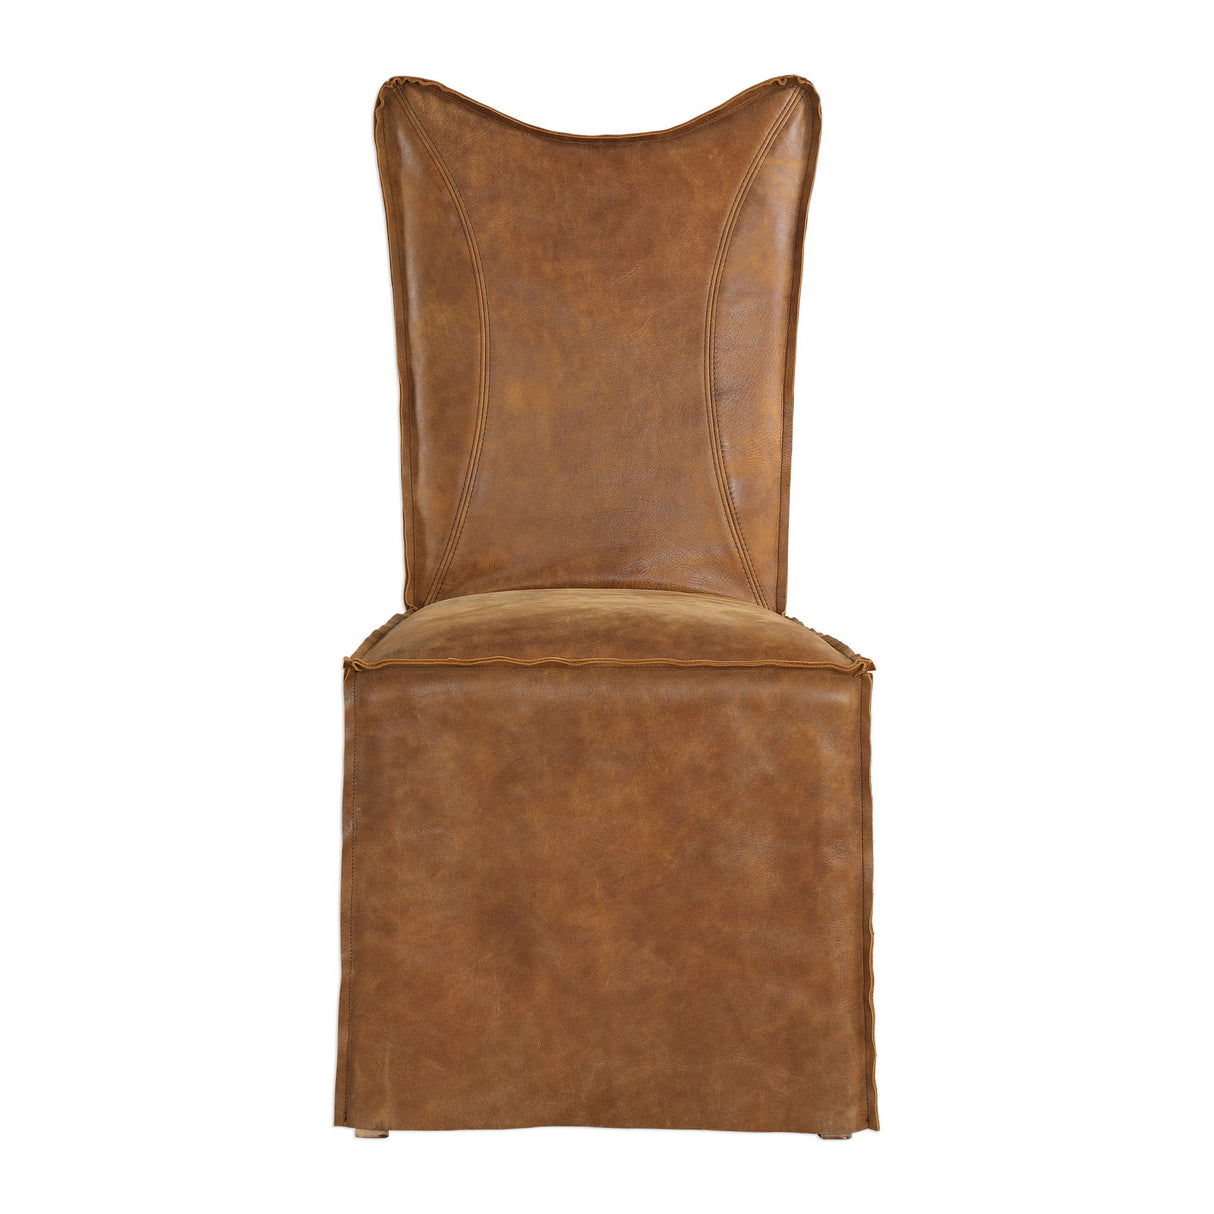 Delroy - Armless Chairs, Set Of 2 - Cognac